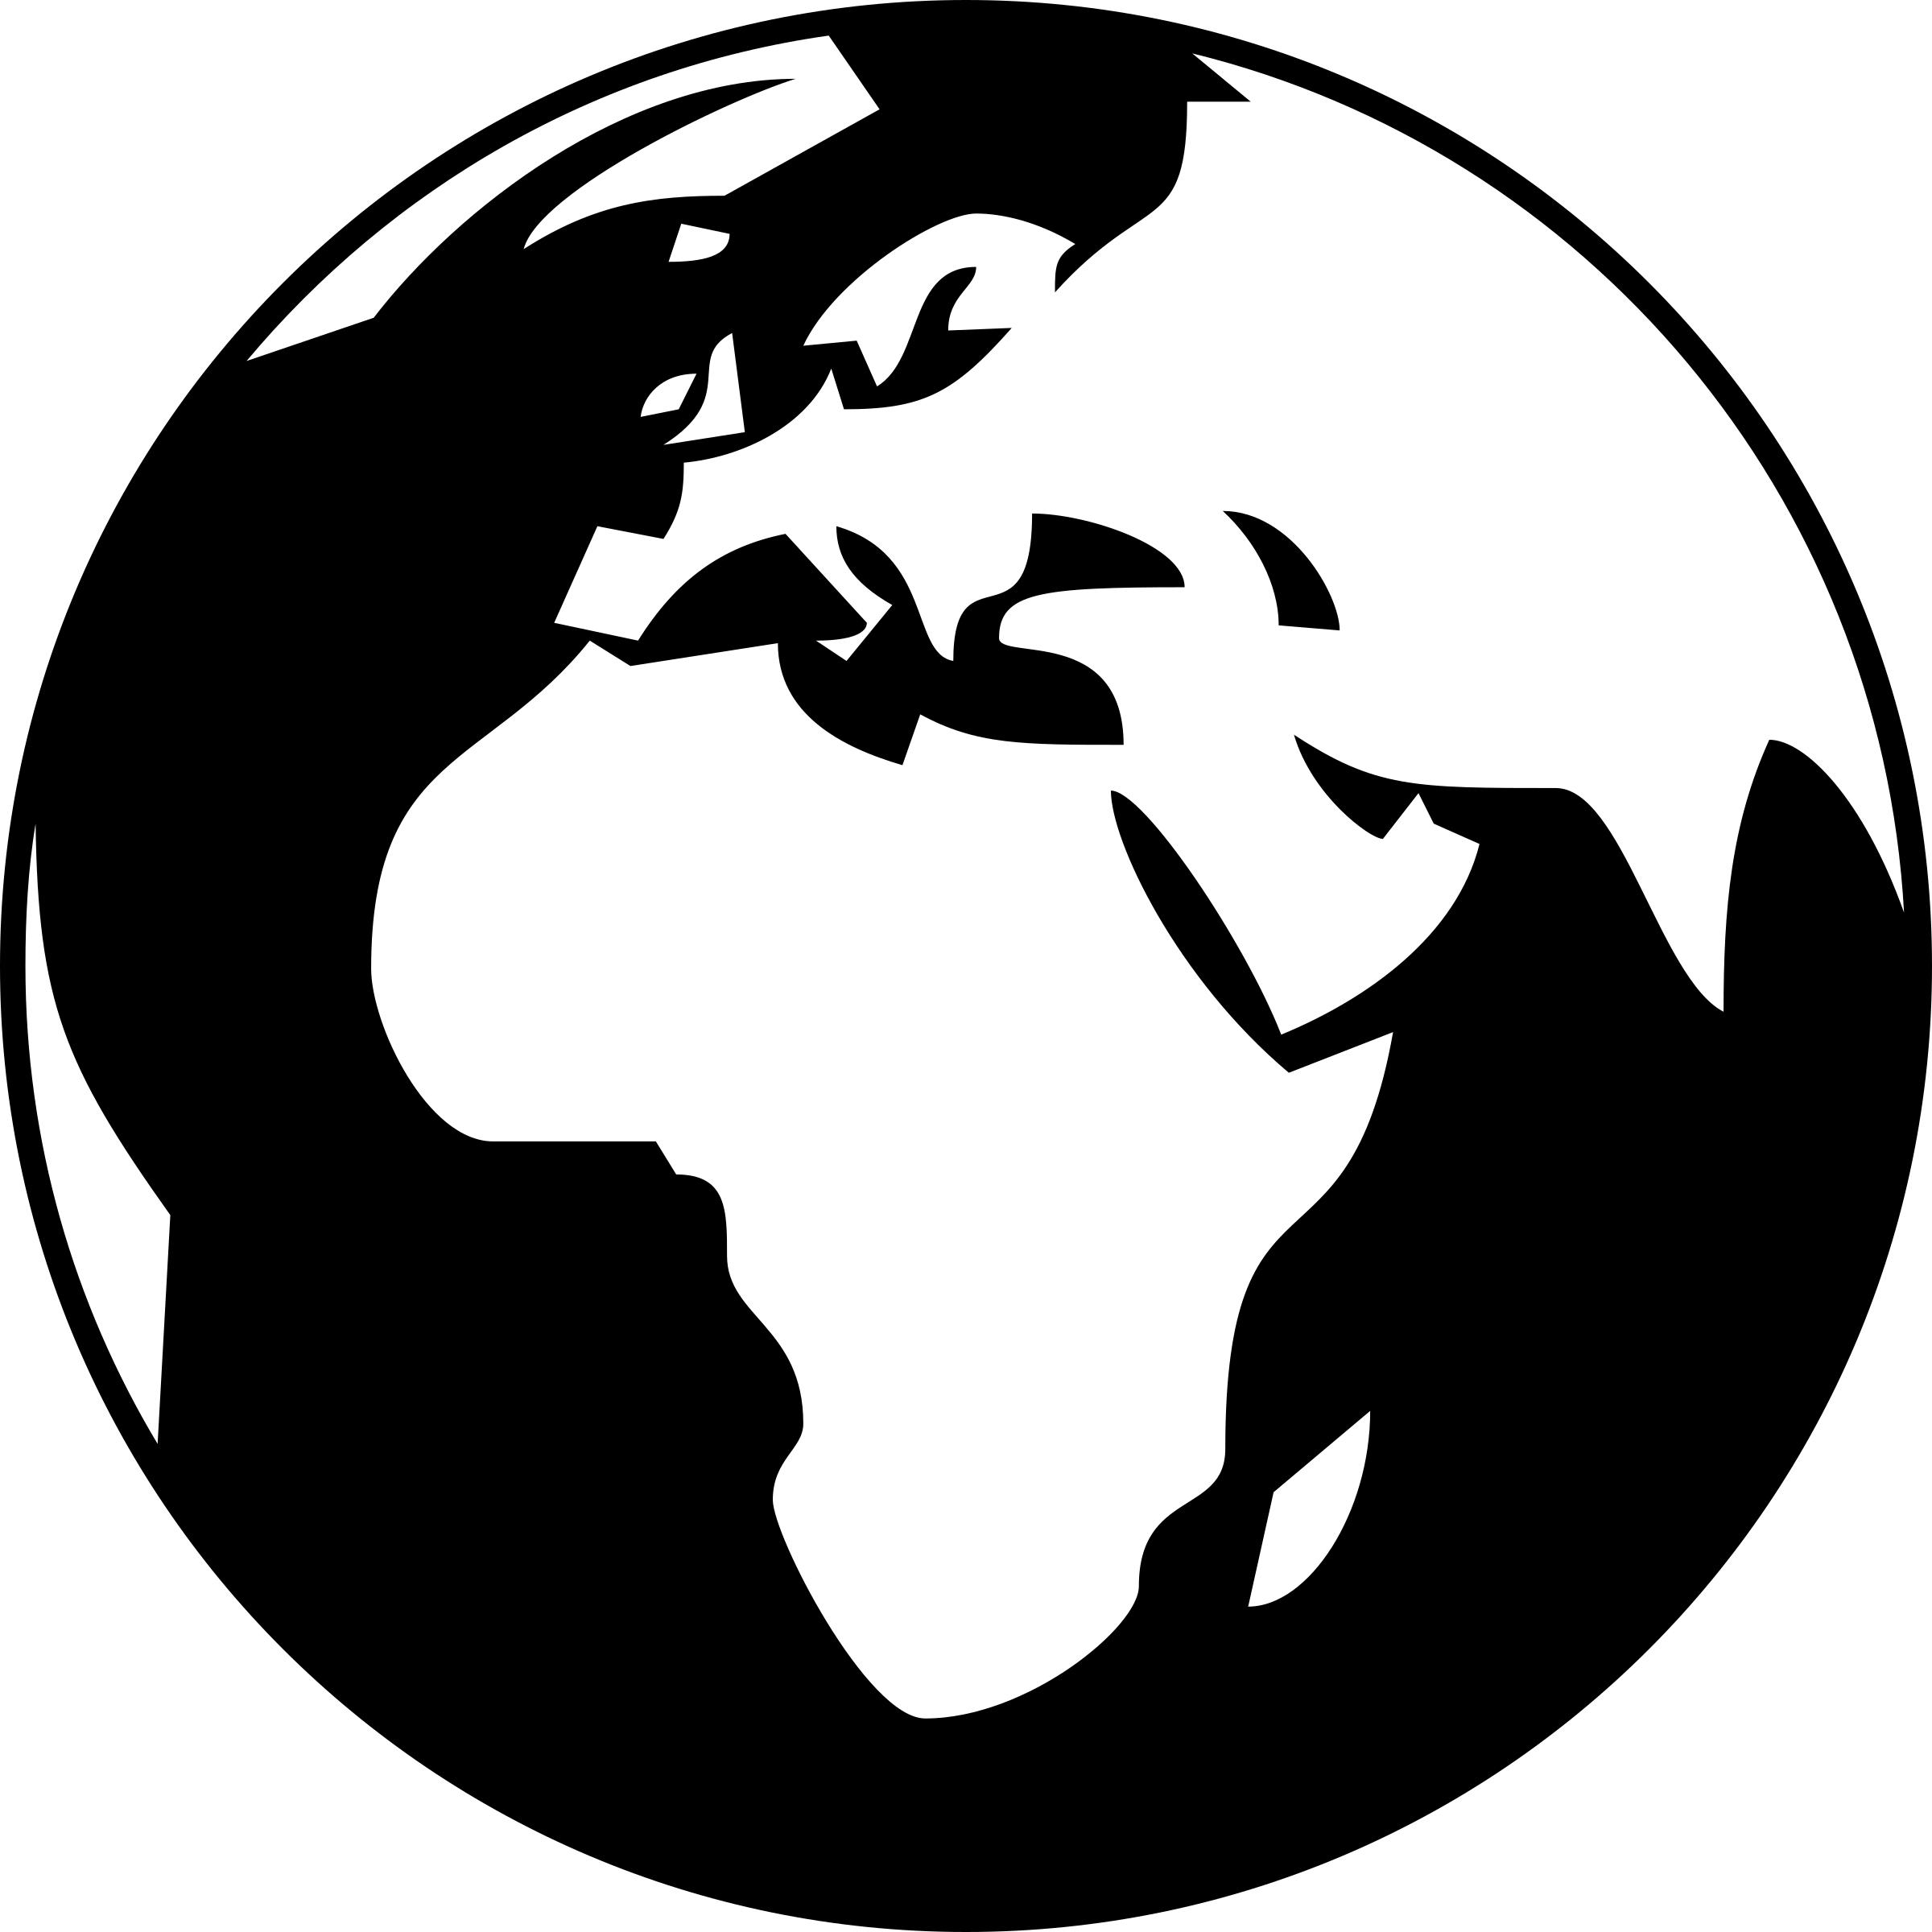 Simple globe showing Africa, Asia and Europe in black and white png